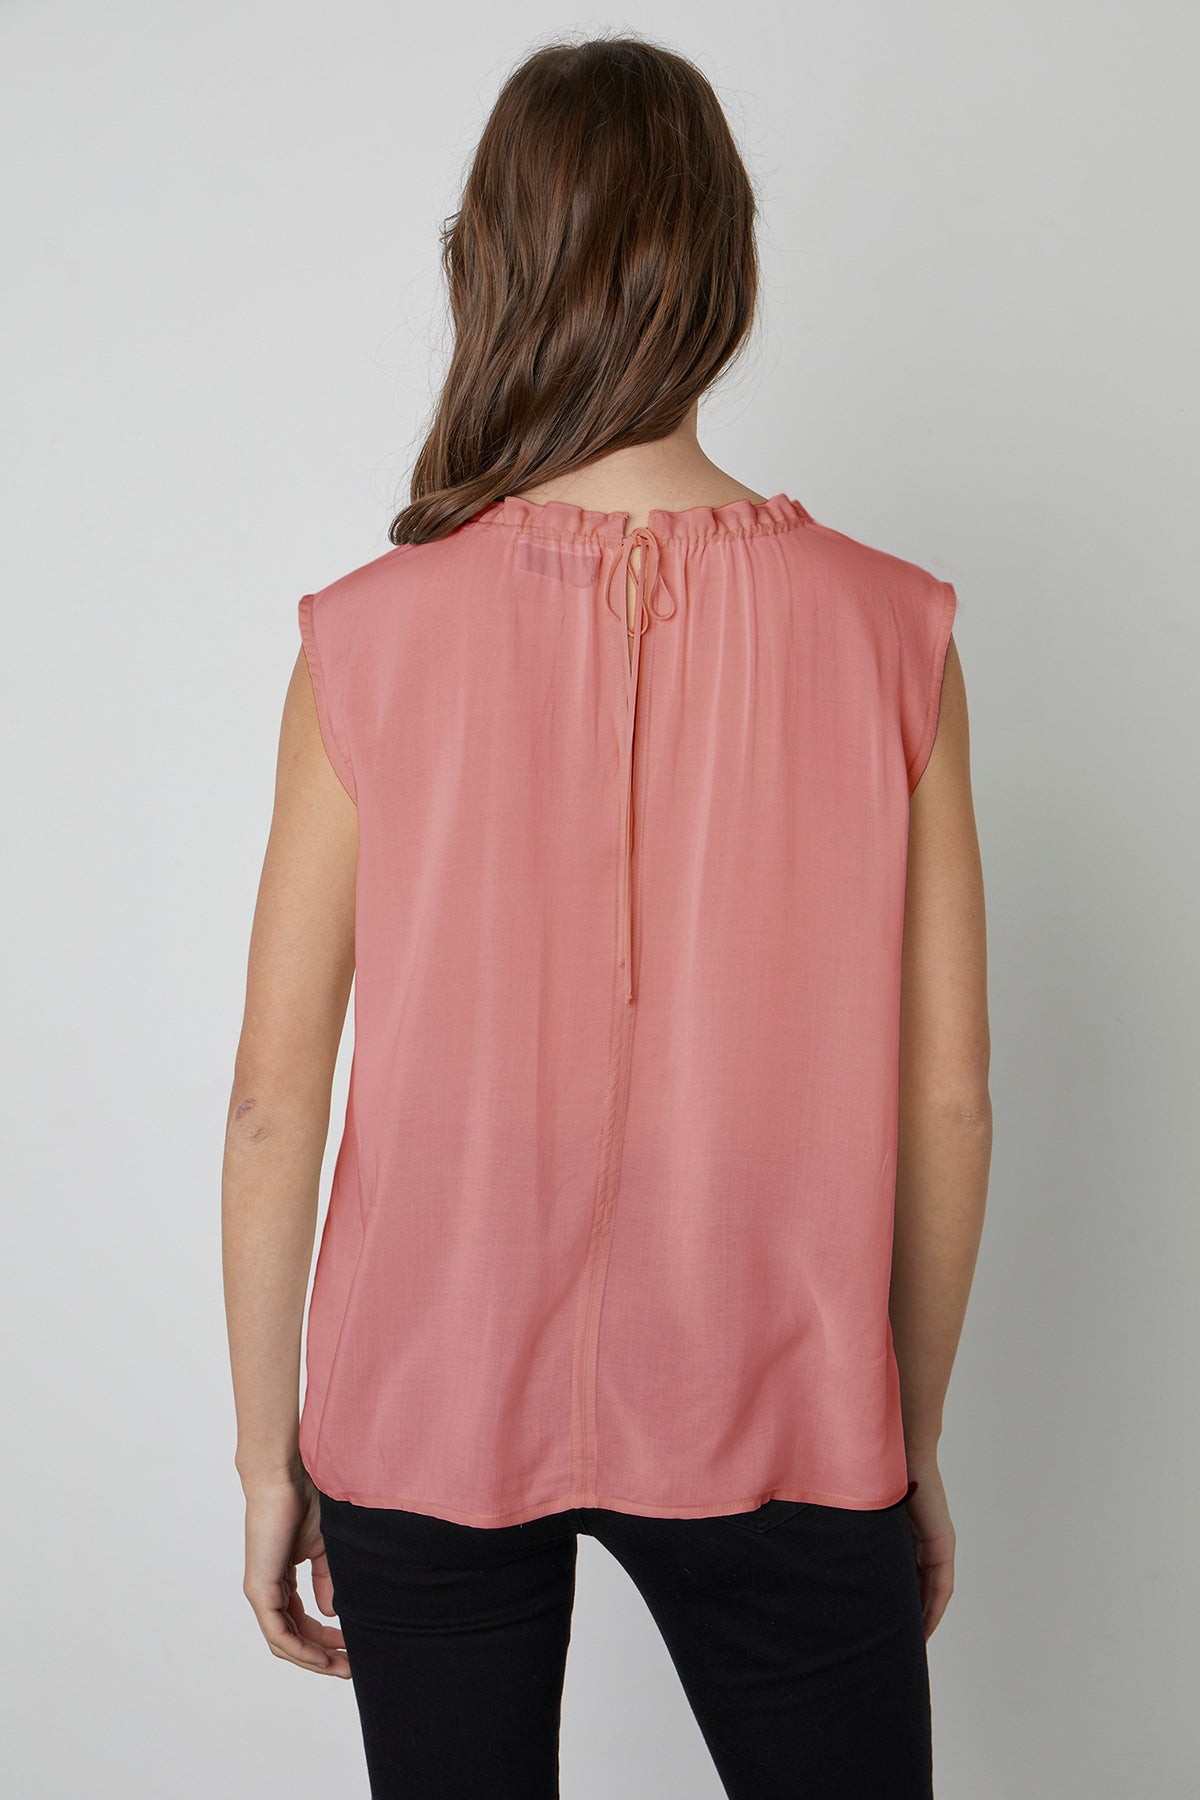   Wenna Sleeveless Blouse in Scallop Back 